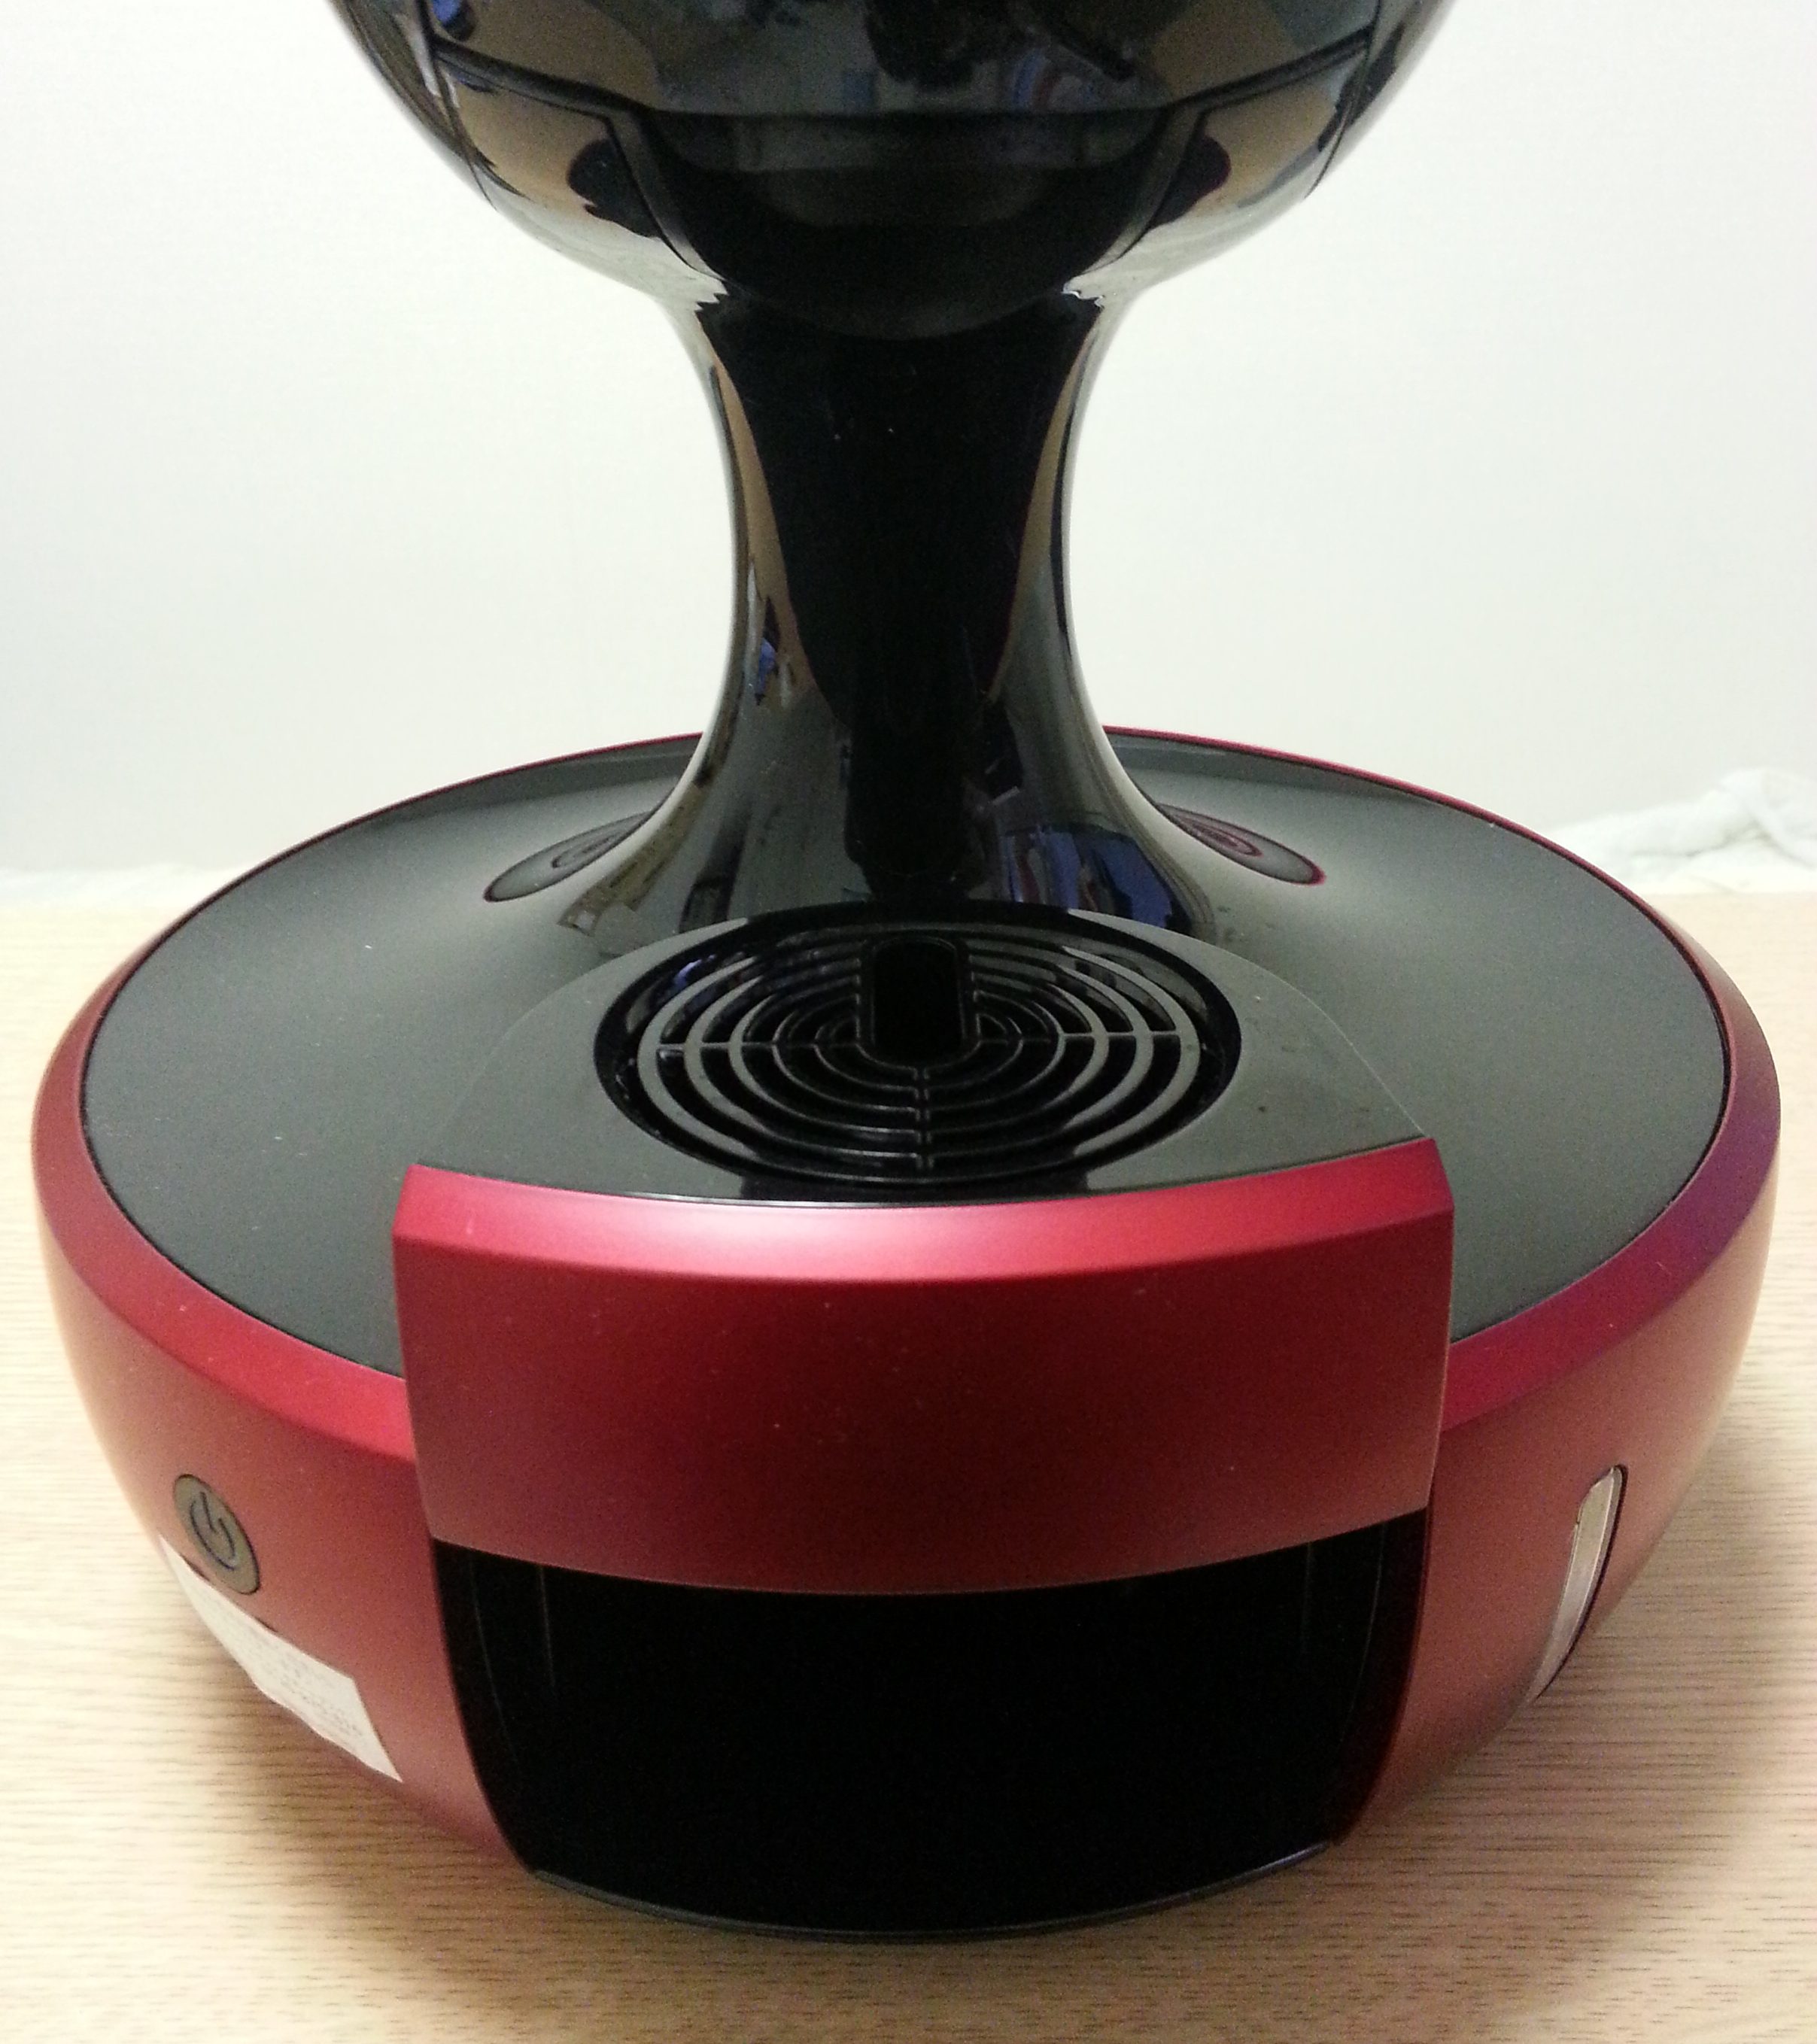 dolcegusto-drop-review7